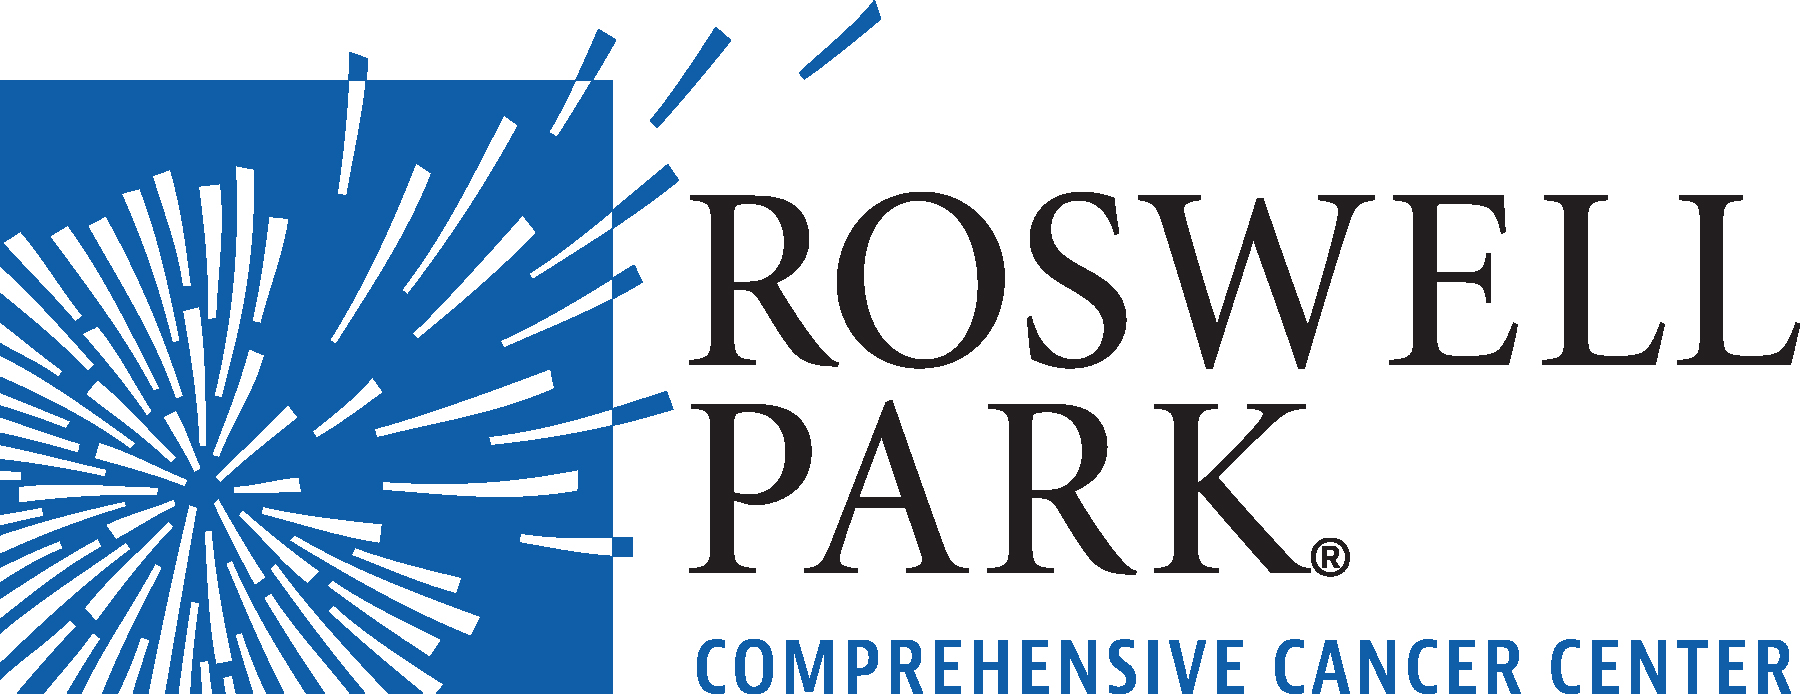 Seven Roswell Park Physicians Recognized as ‘Exceptional Women in Medicine’